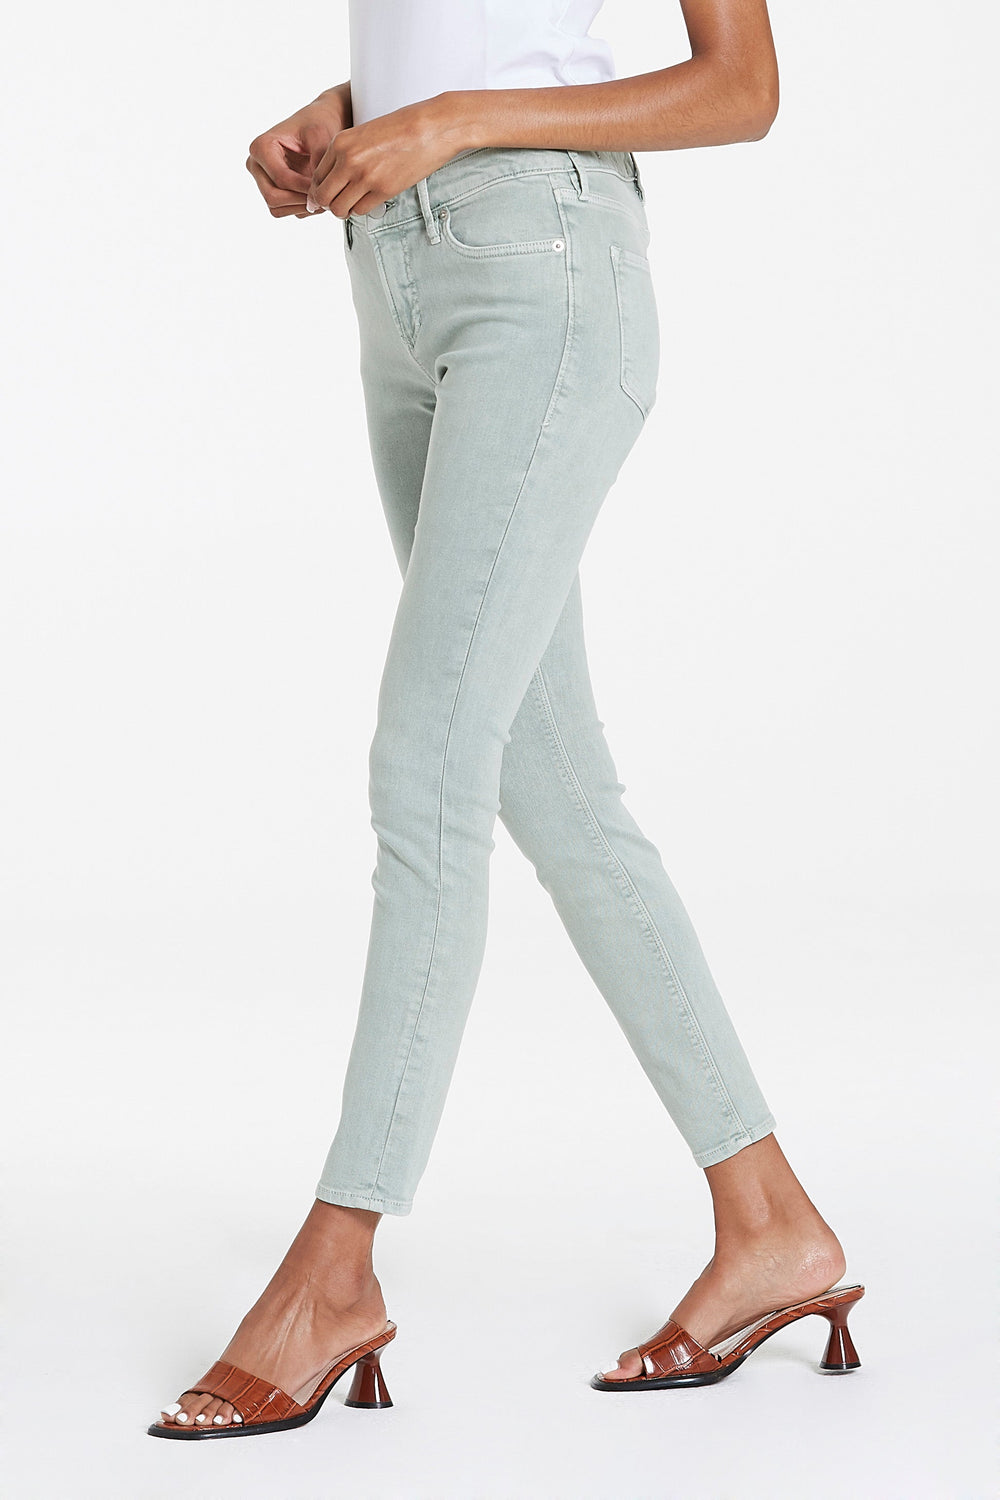 image of a female model wearing a GISELE HIGH RISE ANKLE SKINNY CUCUMBER JEANS JEANS